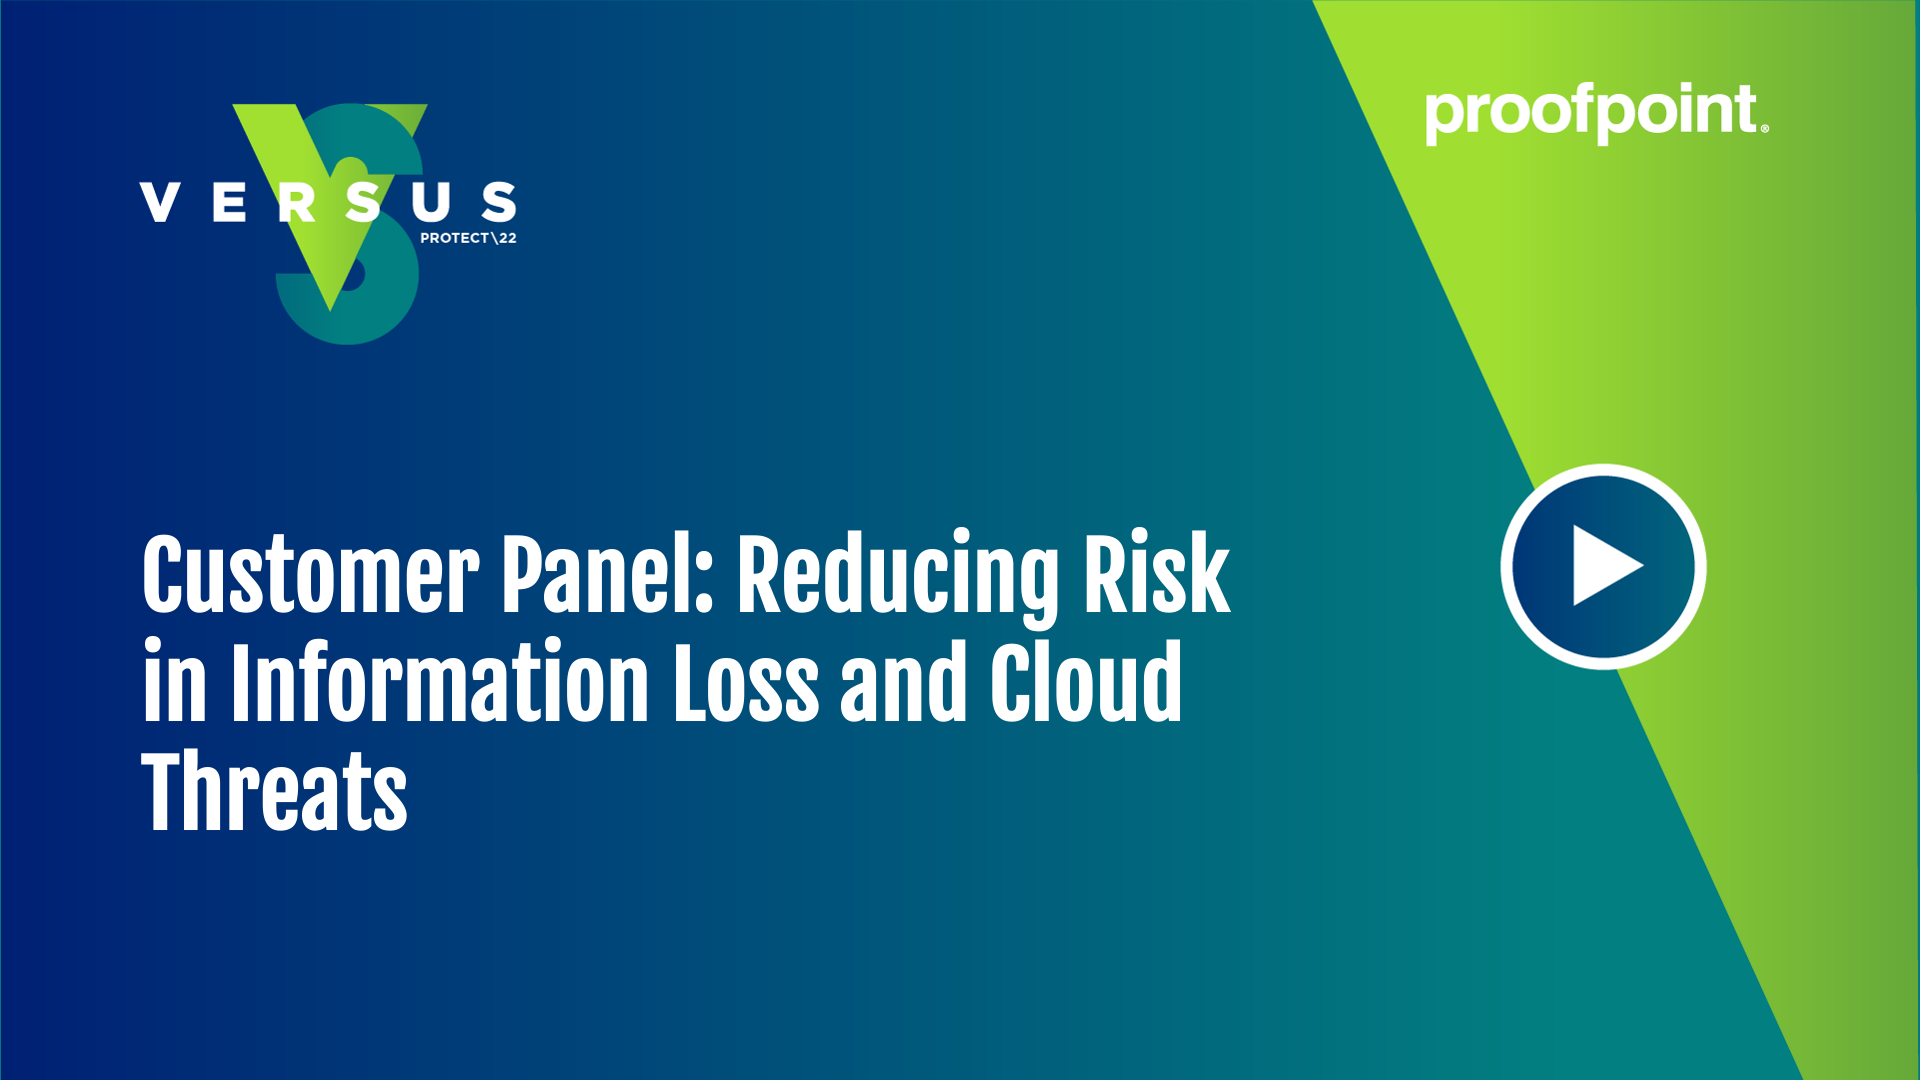 Customer Panel - Reducing Risk in Information Loss and Cloud Threats